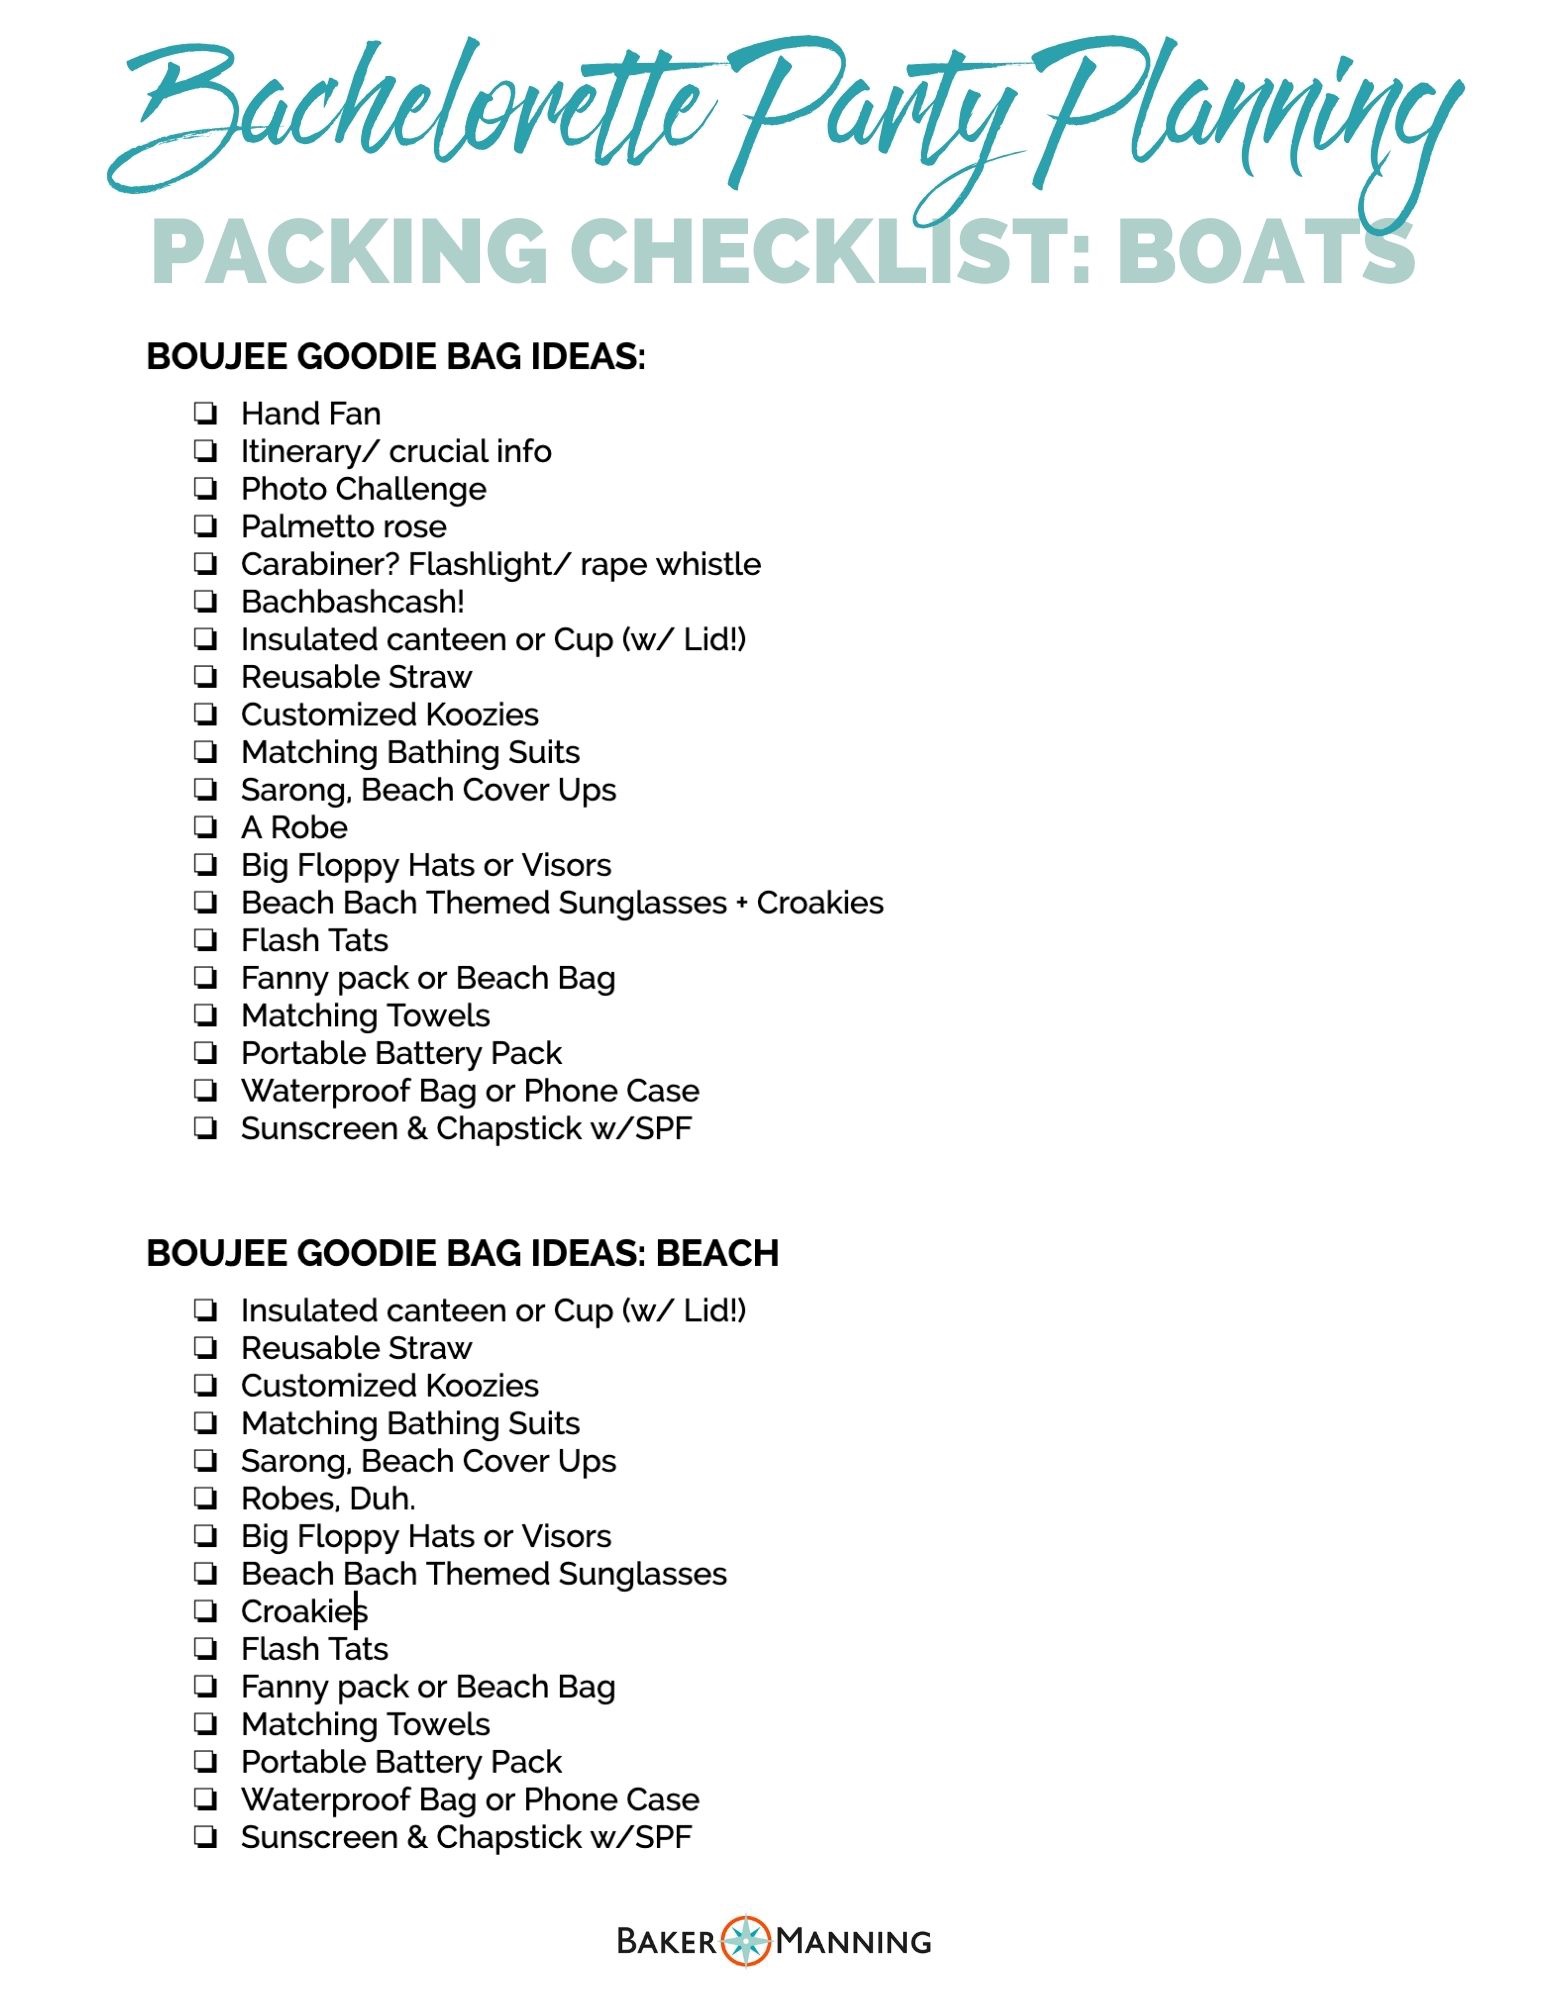 packing checklist for a bachelorette party